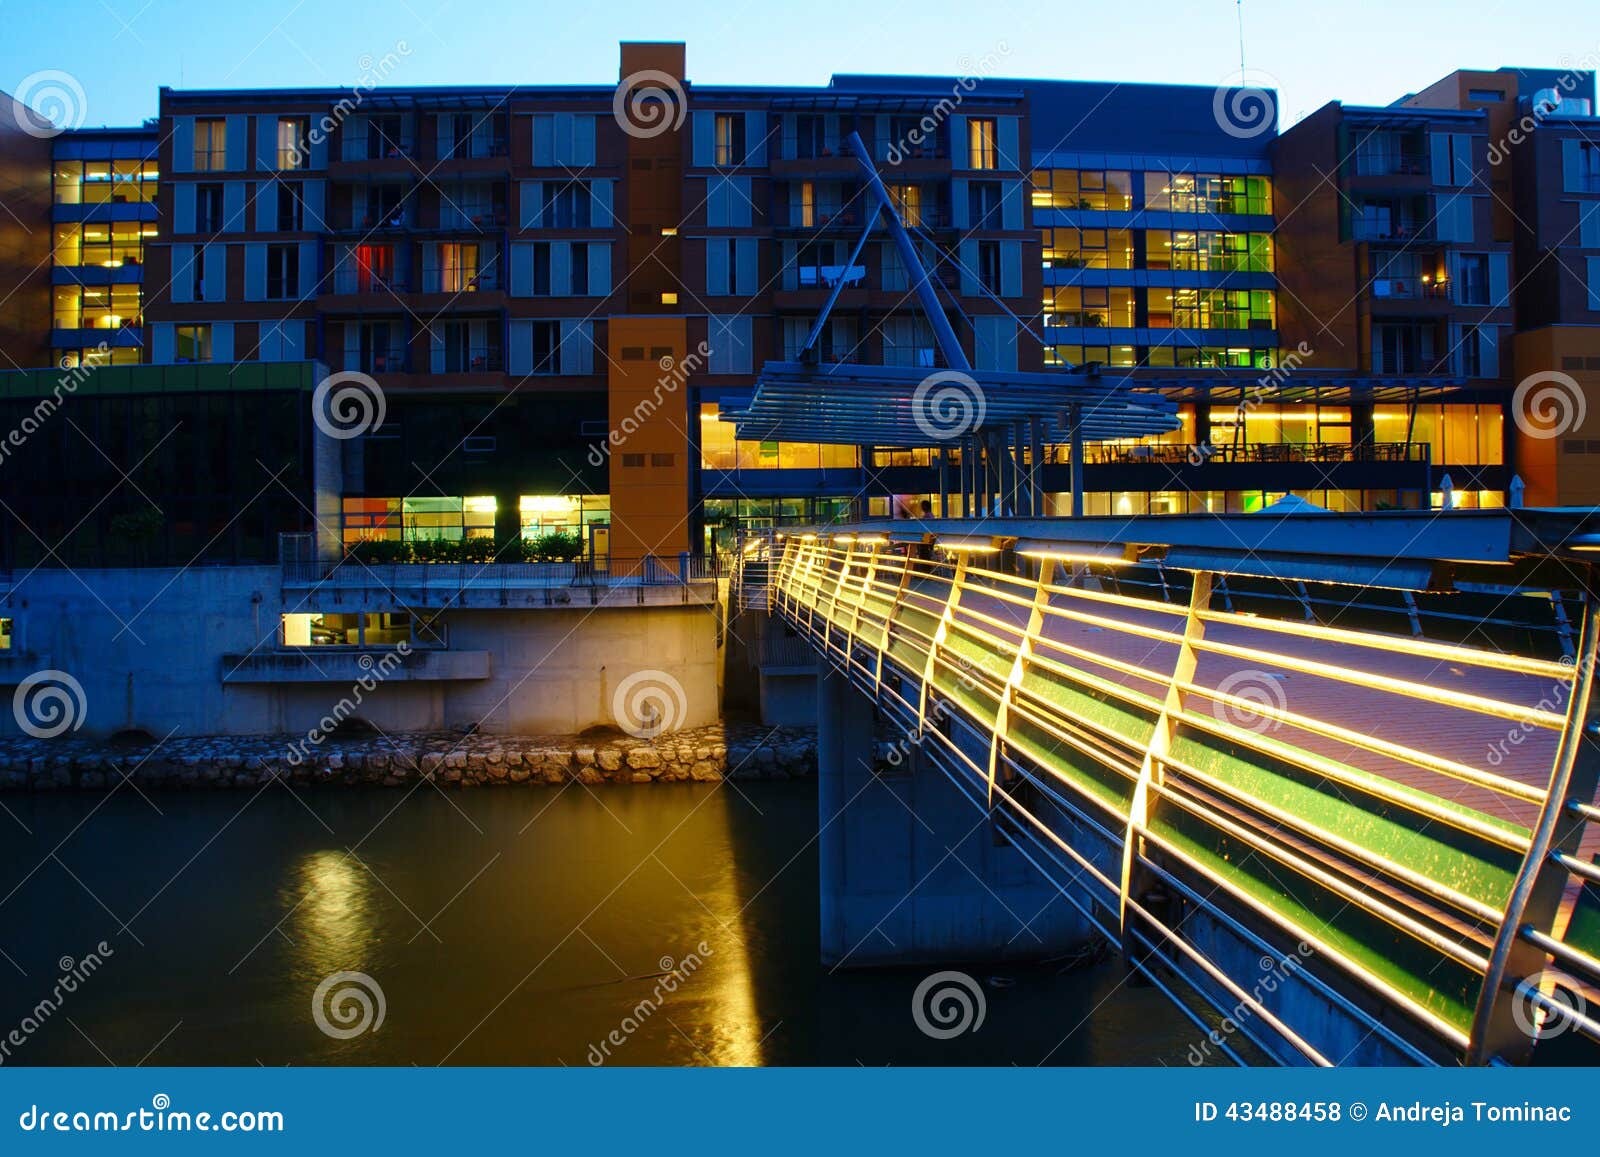 modern hotel by the river by night